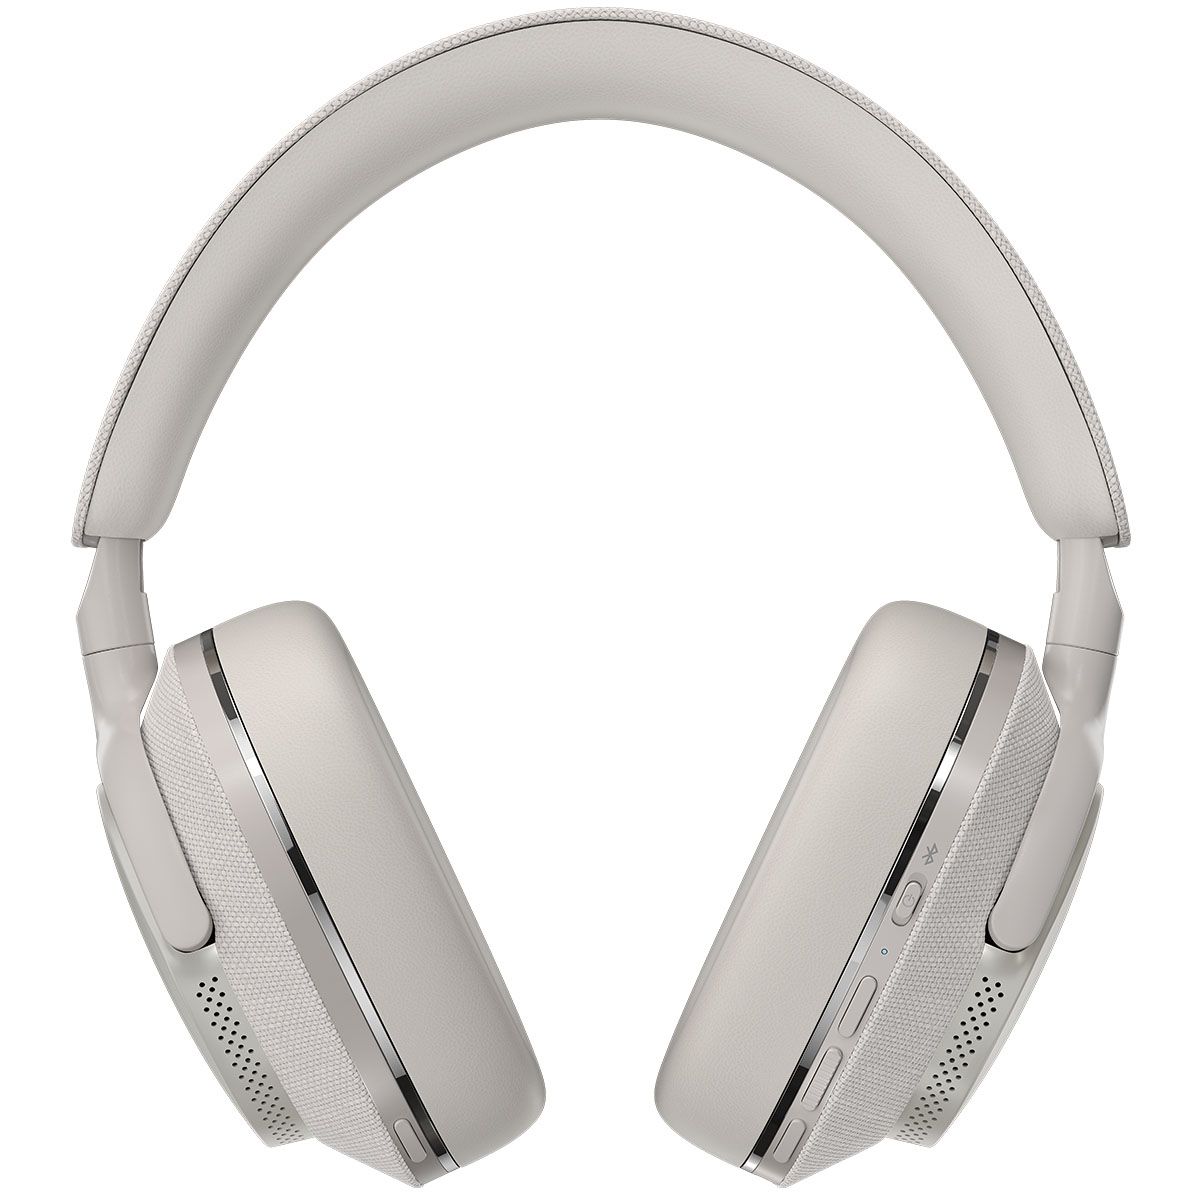 Front view of the Px7 S2 Premium Wireless Over-Ear Headphones in Light Gray.